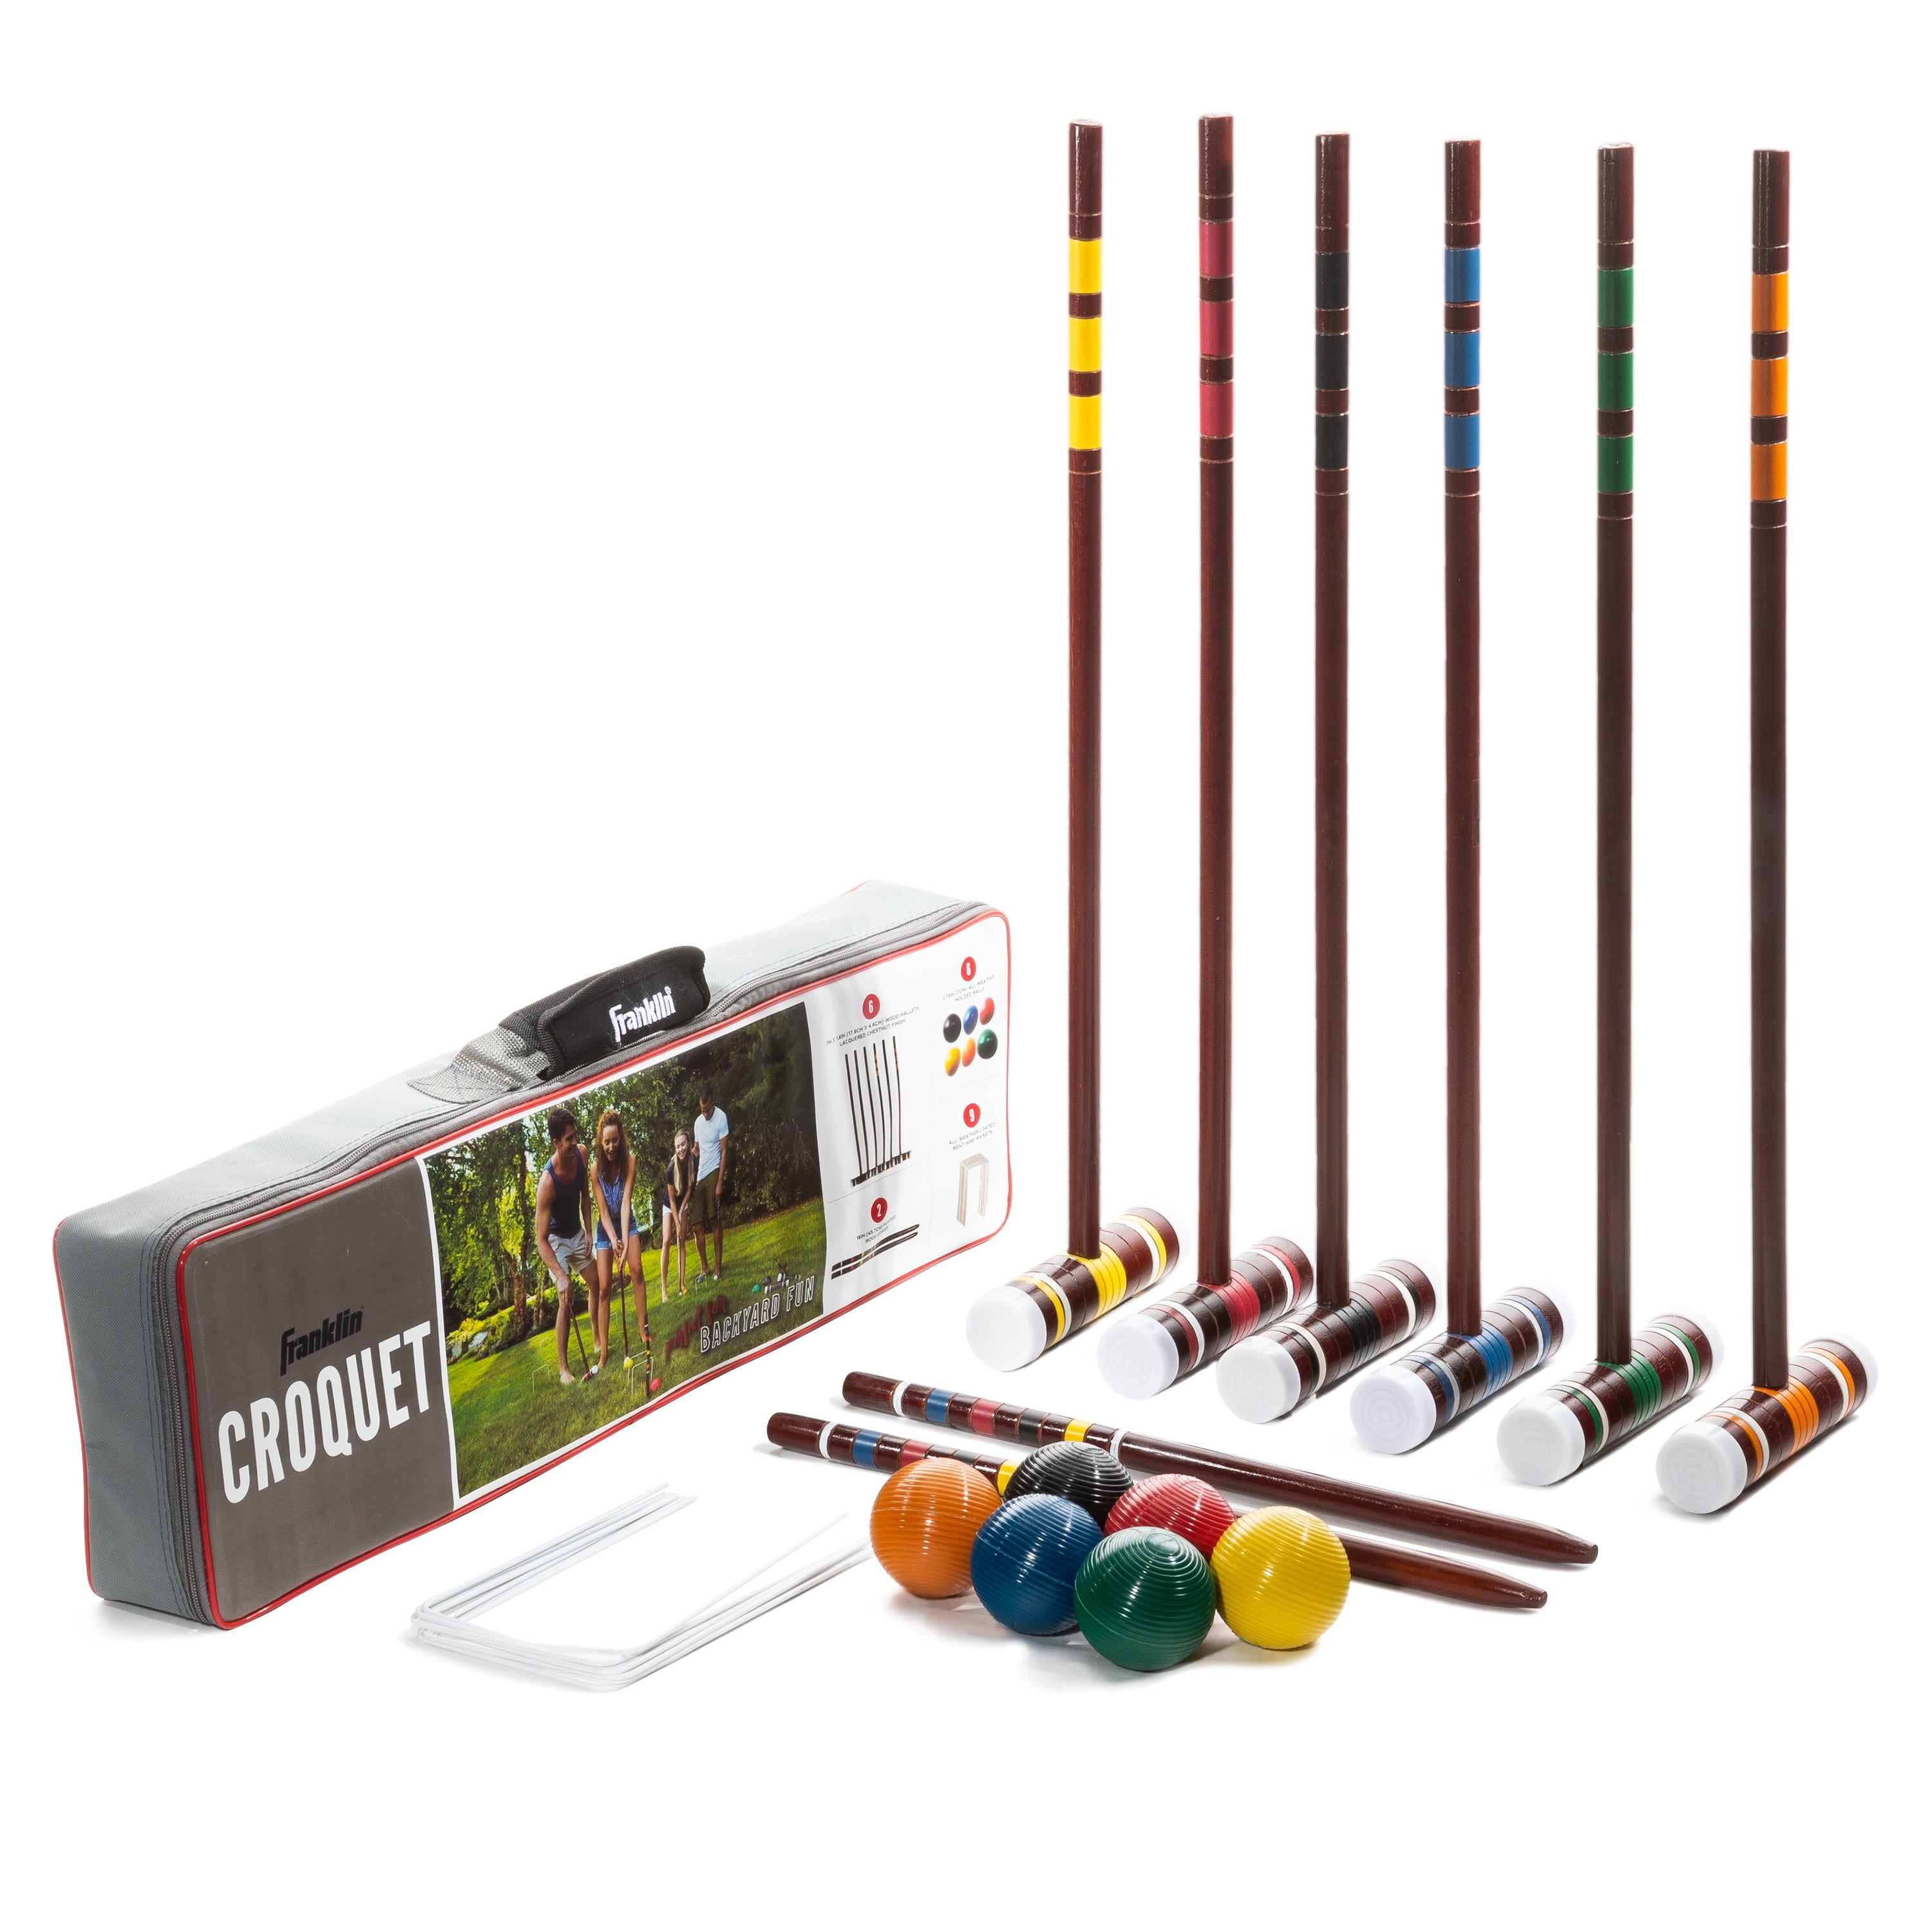 wickets balls Croquet Set Outdoor 6 Player Croquet Set with mallets 